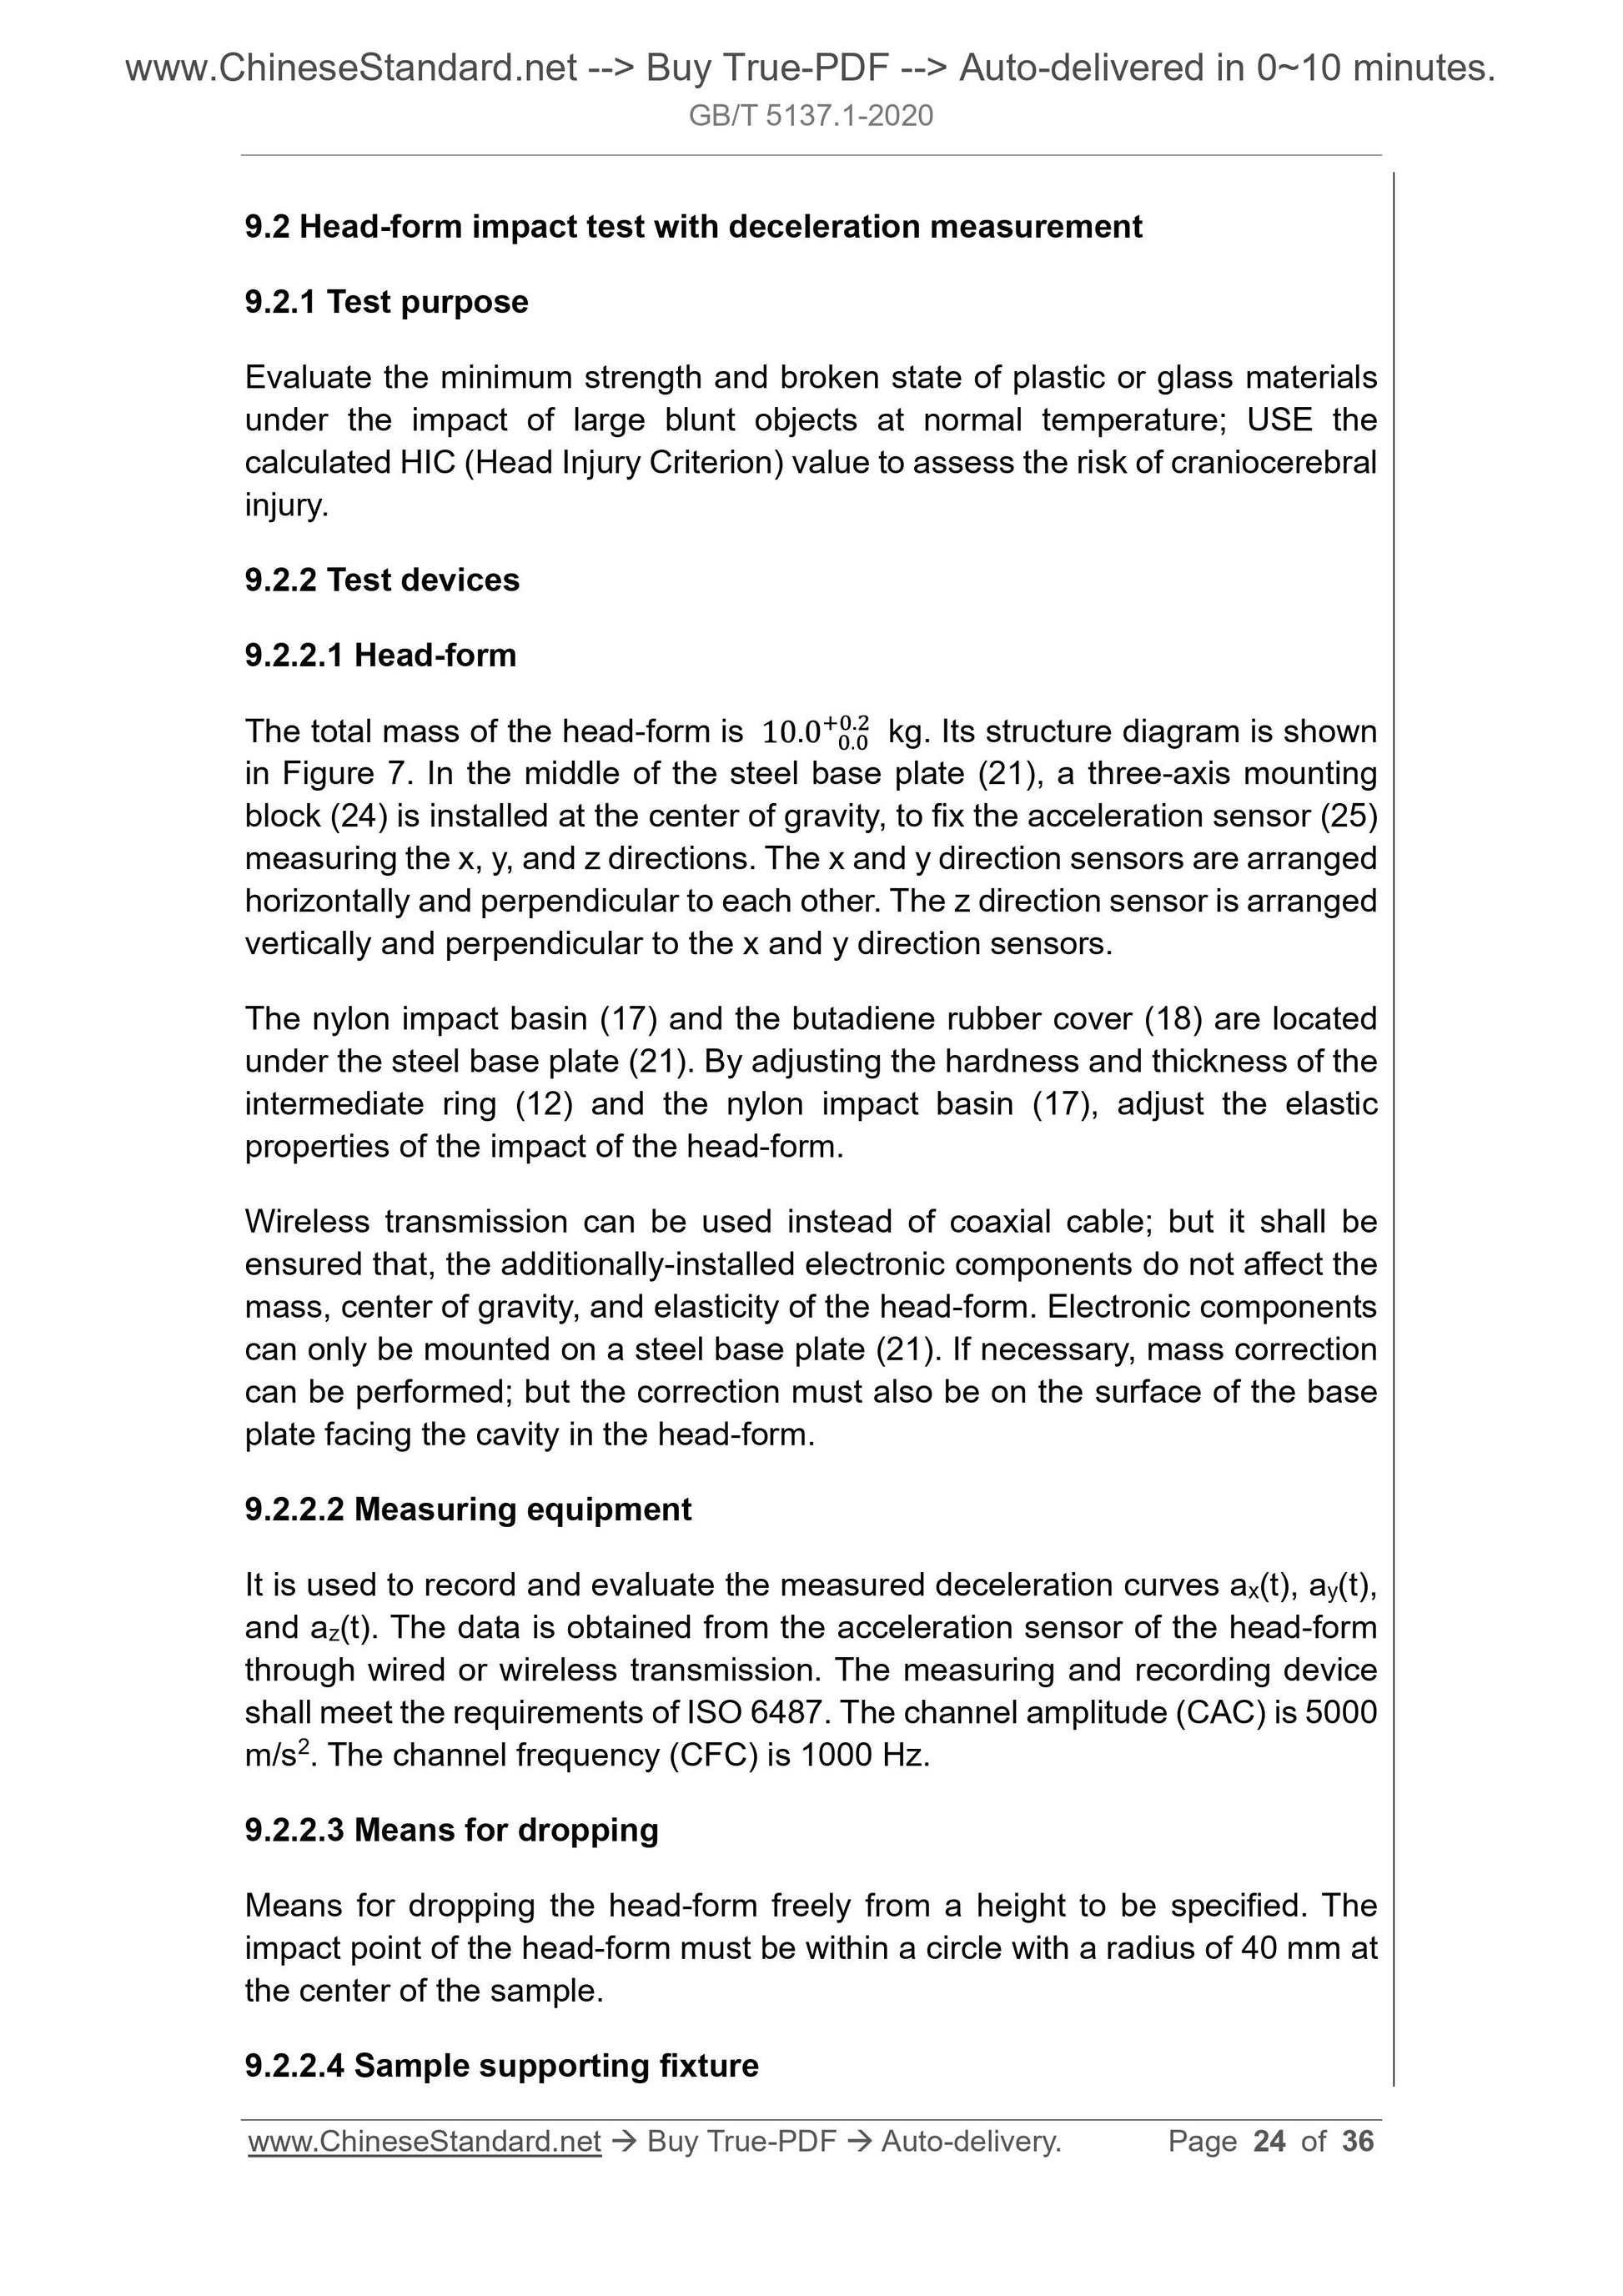 GB/T 5137.1-2020 Page 9